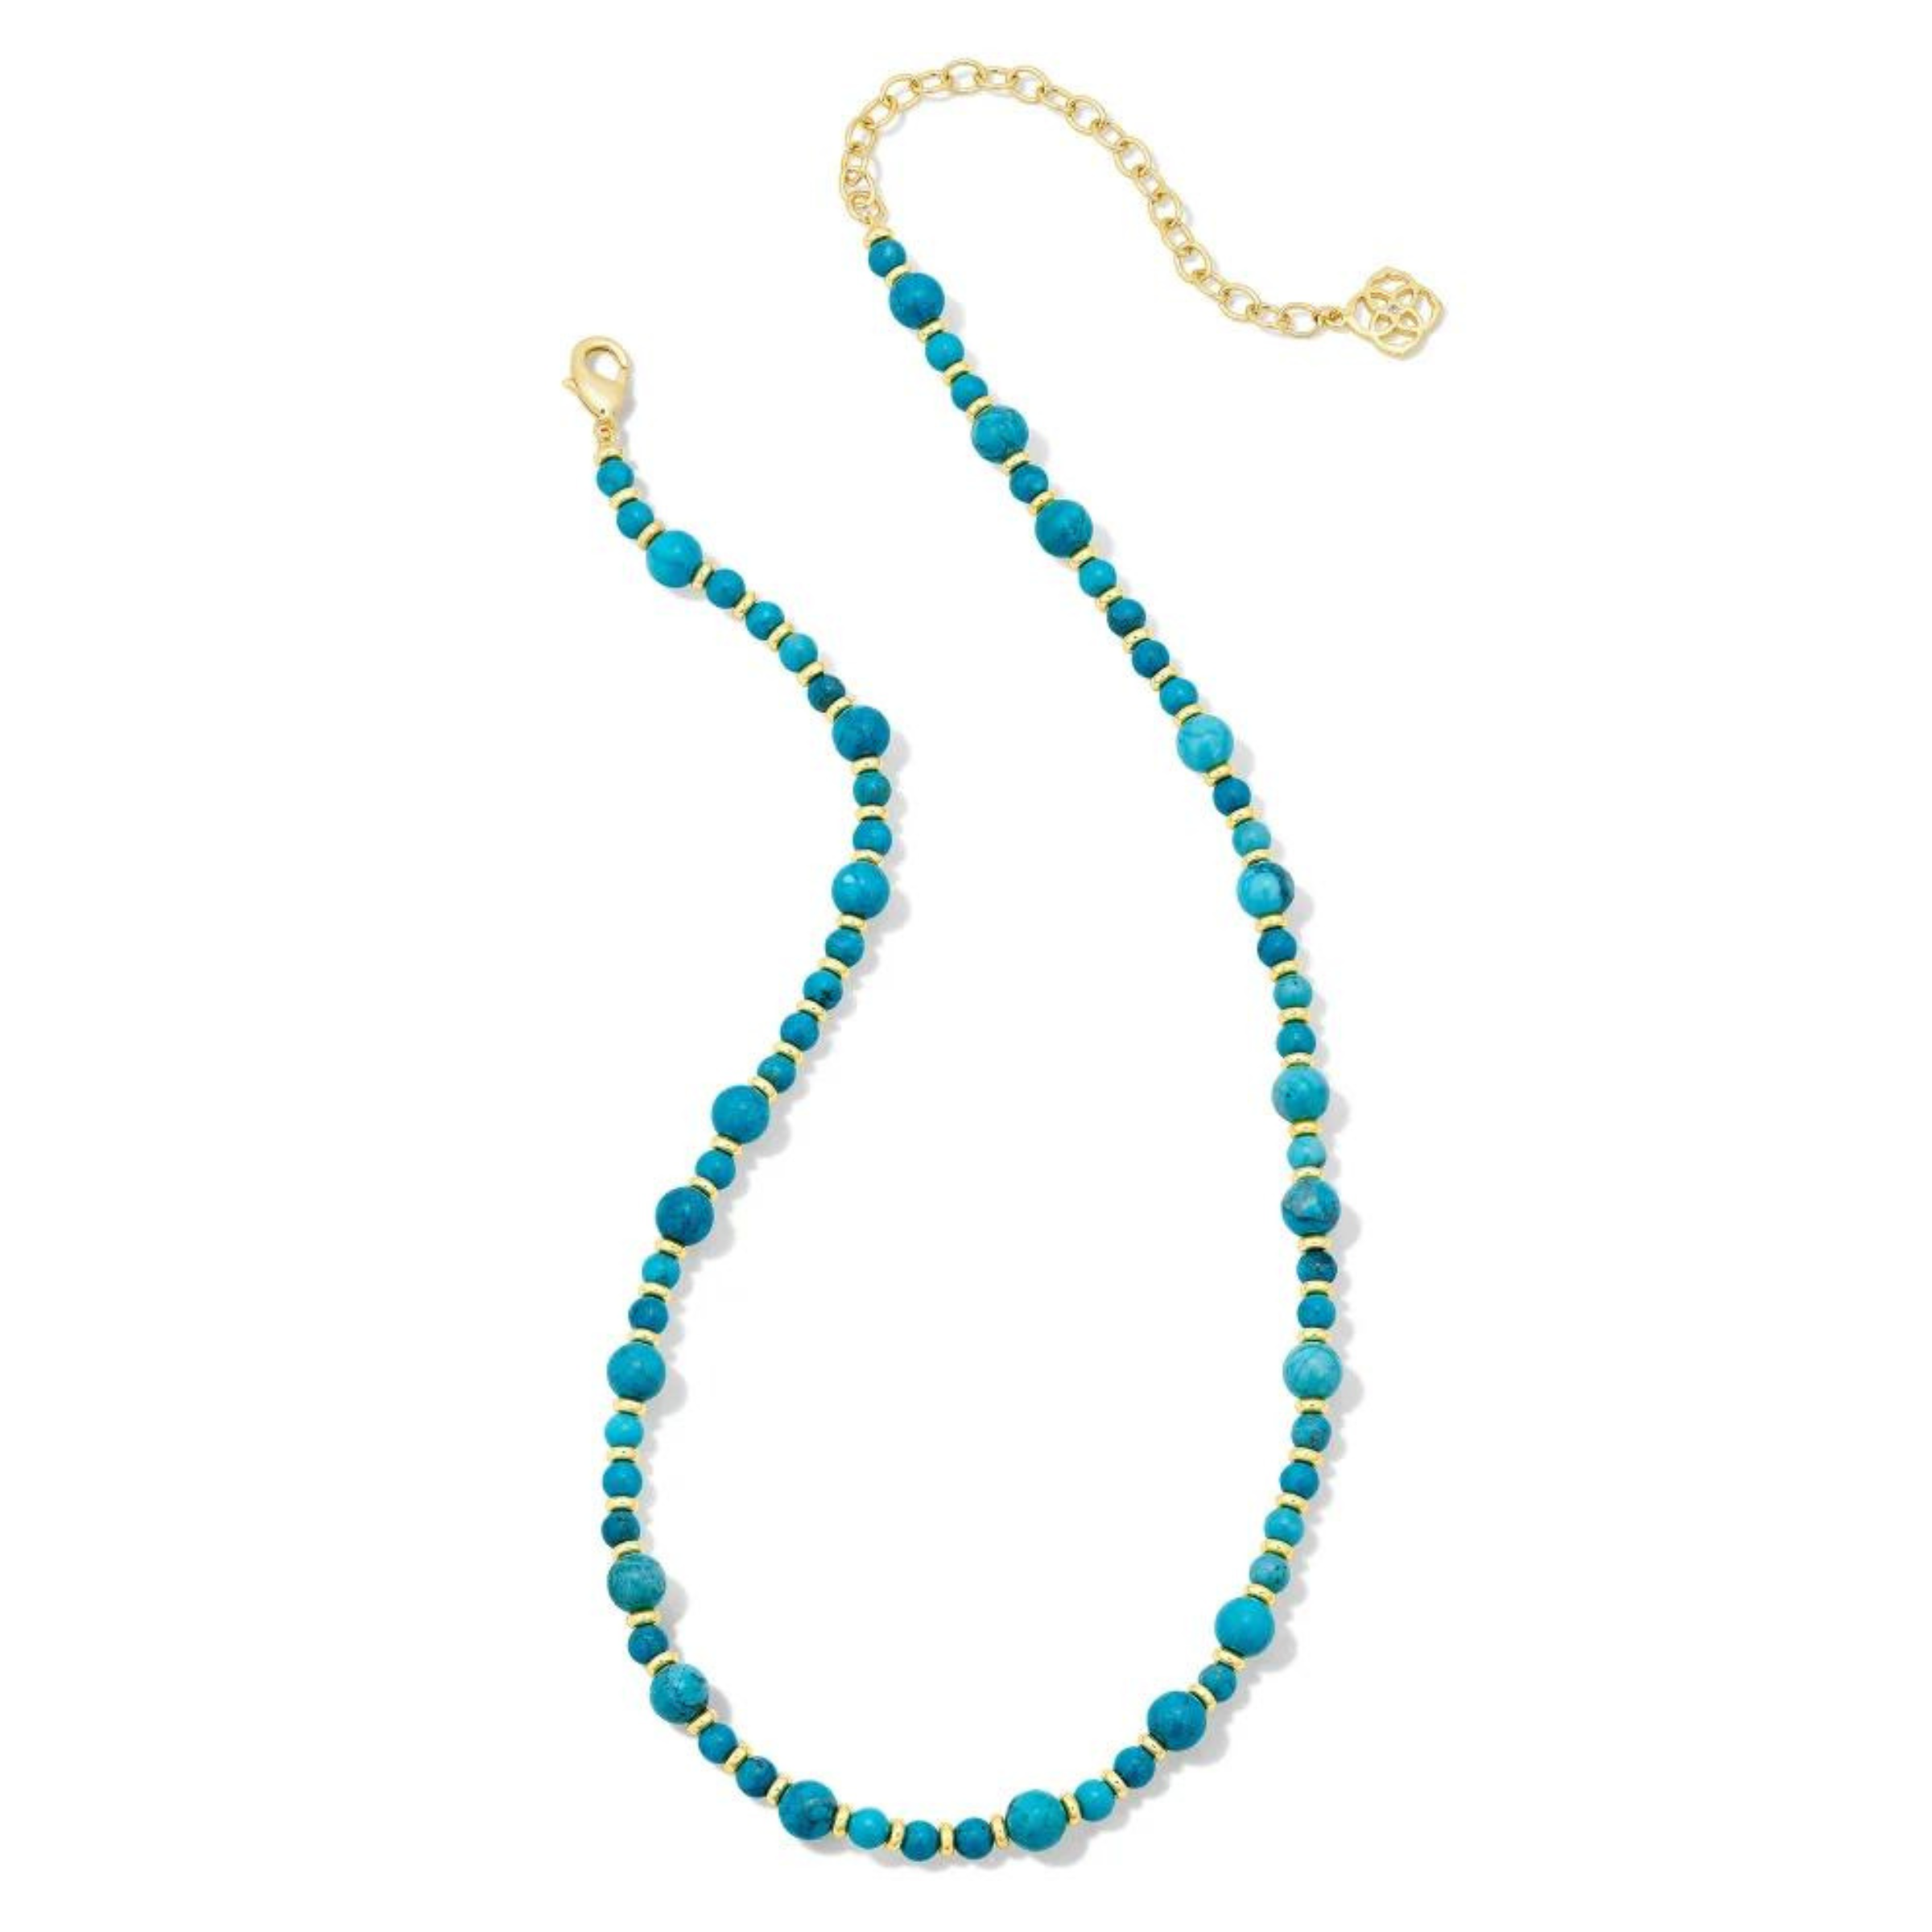 Gold spacers and carying size dark teal marble beaded necklace. This necklace is pictured on a white background. 